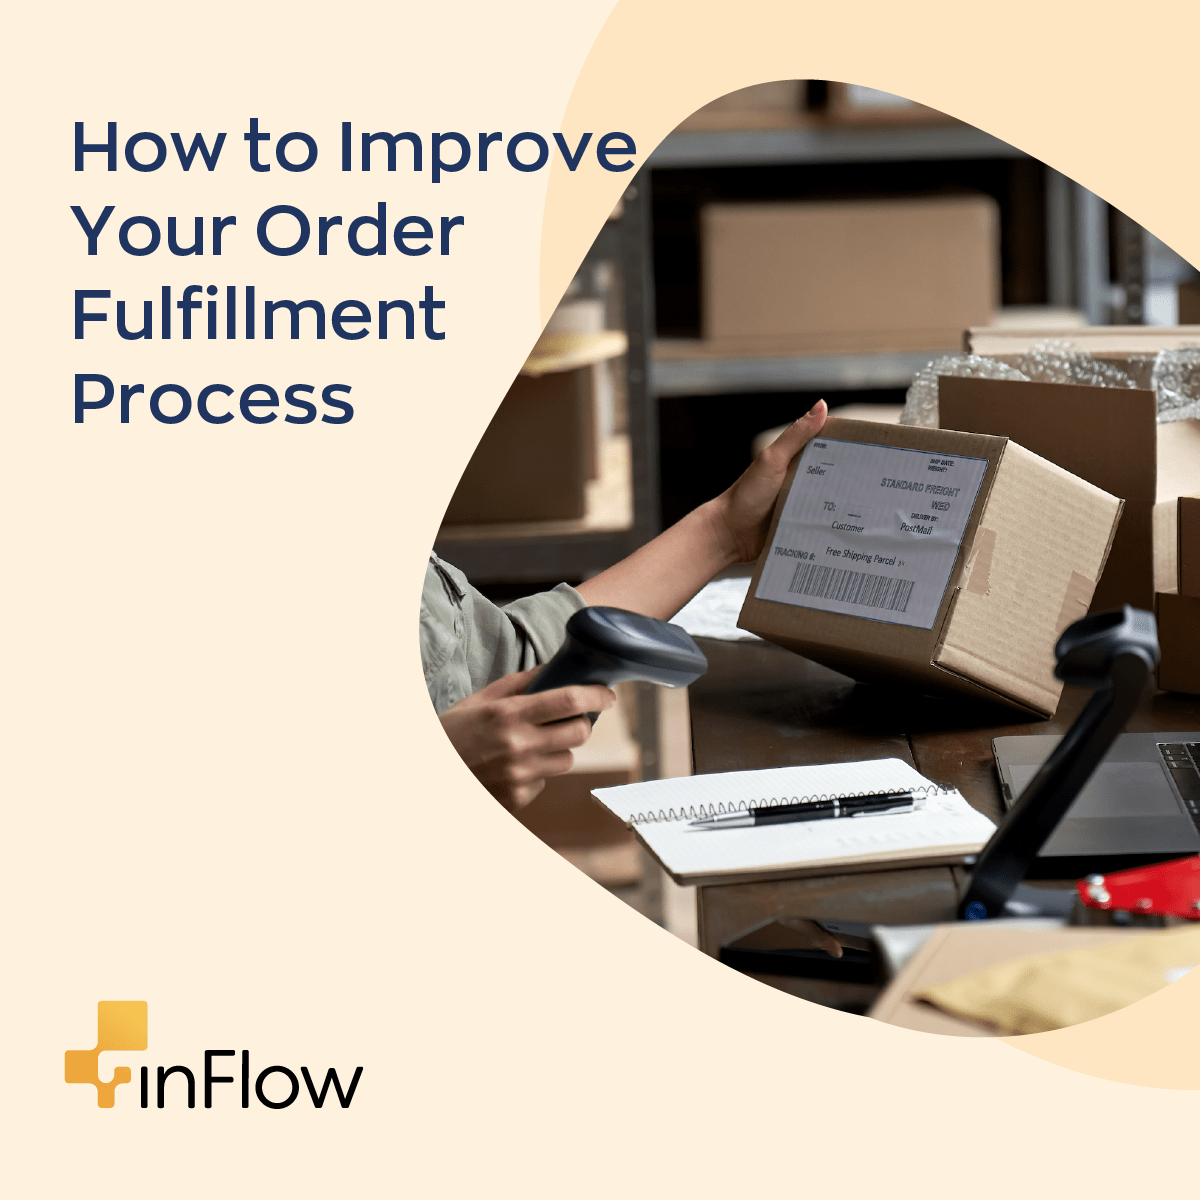 How to improve your order fulfillment process